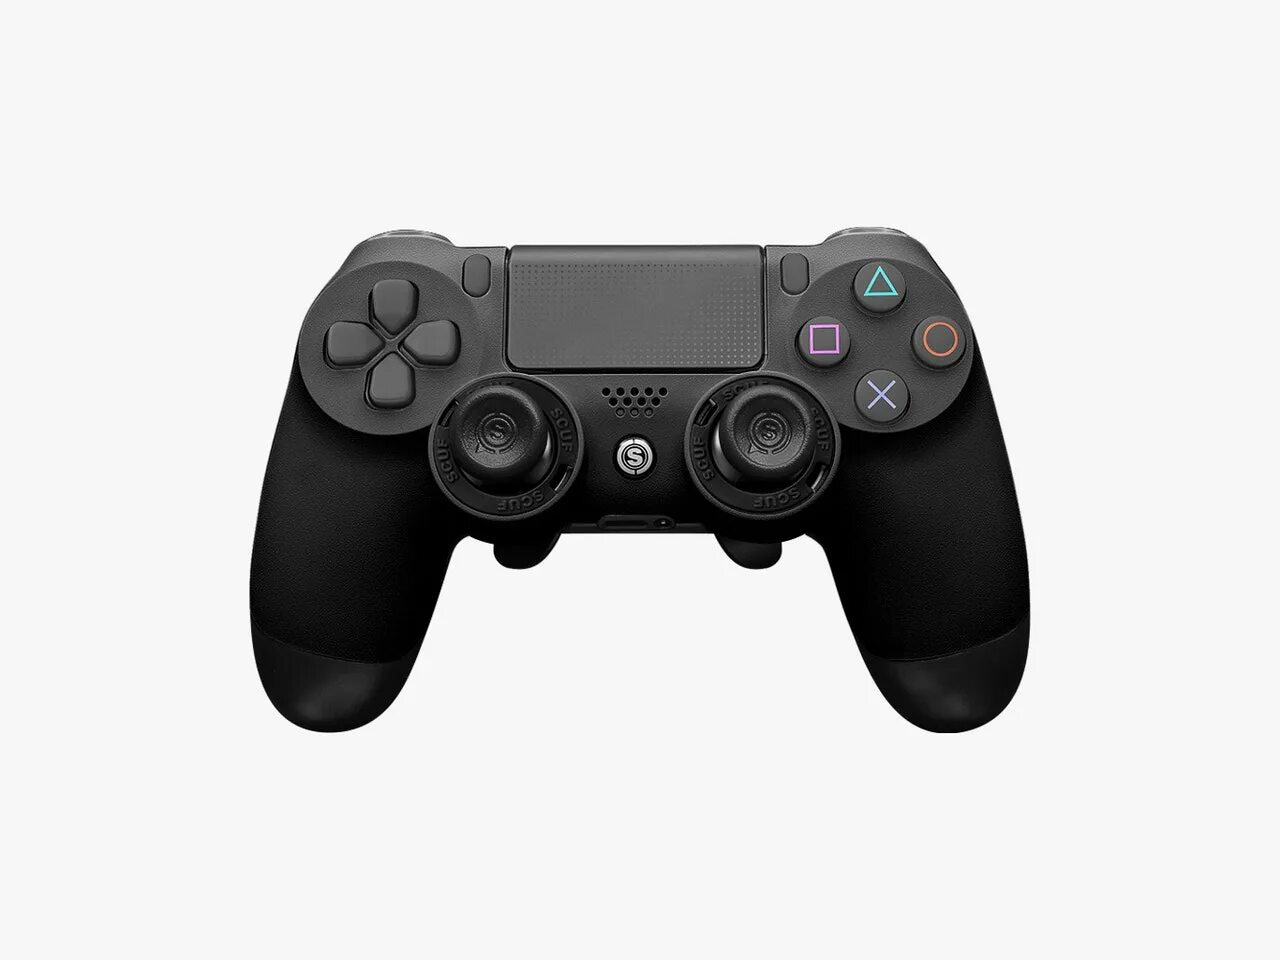 PLAYSTATION 4 Controller. Ps4 Gamepad. Ps5 Pro Controller. Джойстик интернет